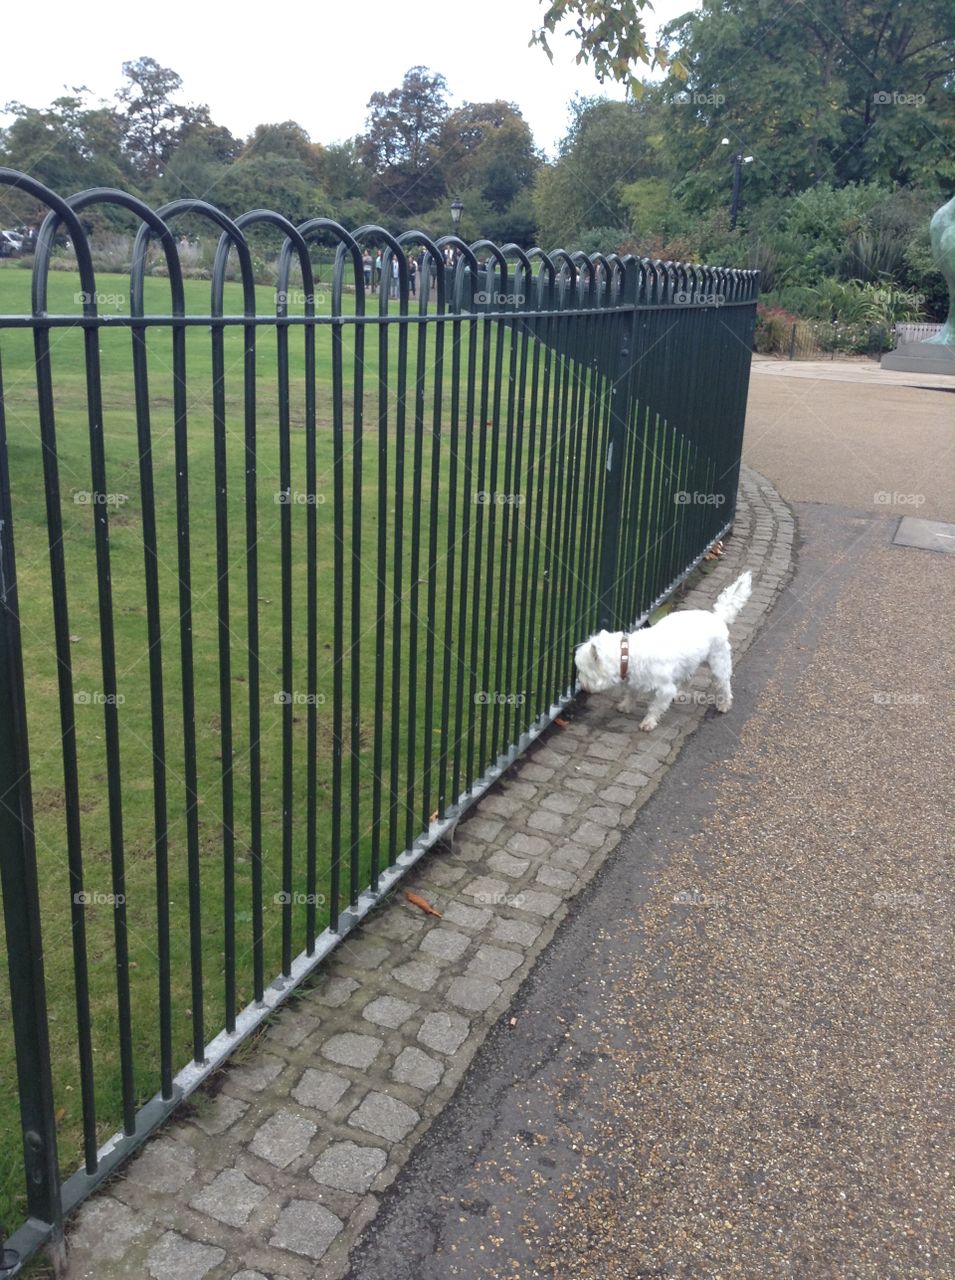 The morning walk for a white dog at Hyde park, London 